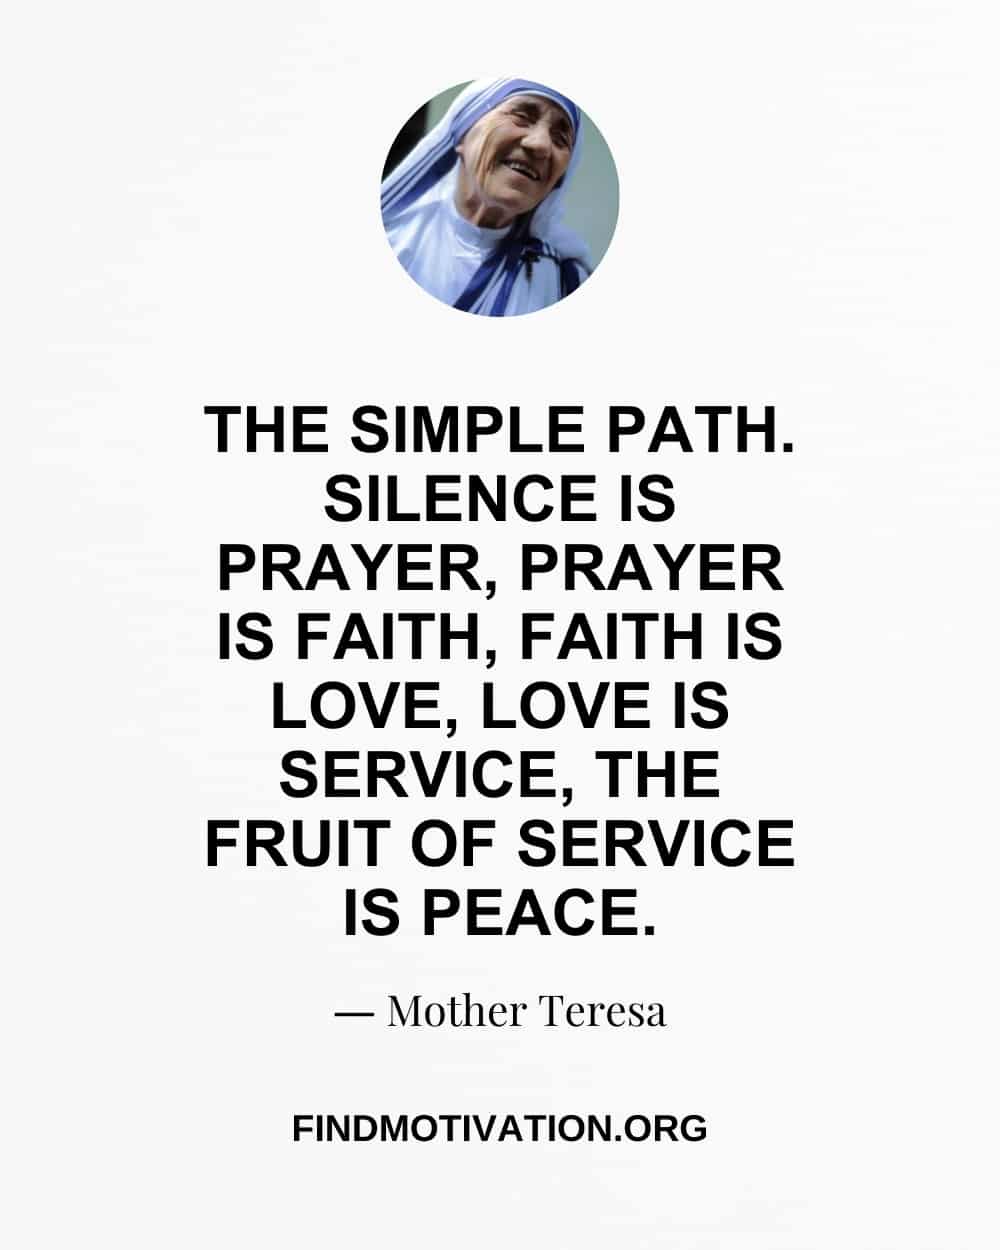 Mother Teresa Quotes To Spread Love In The World